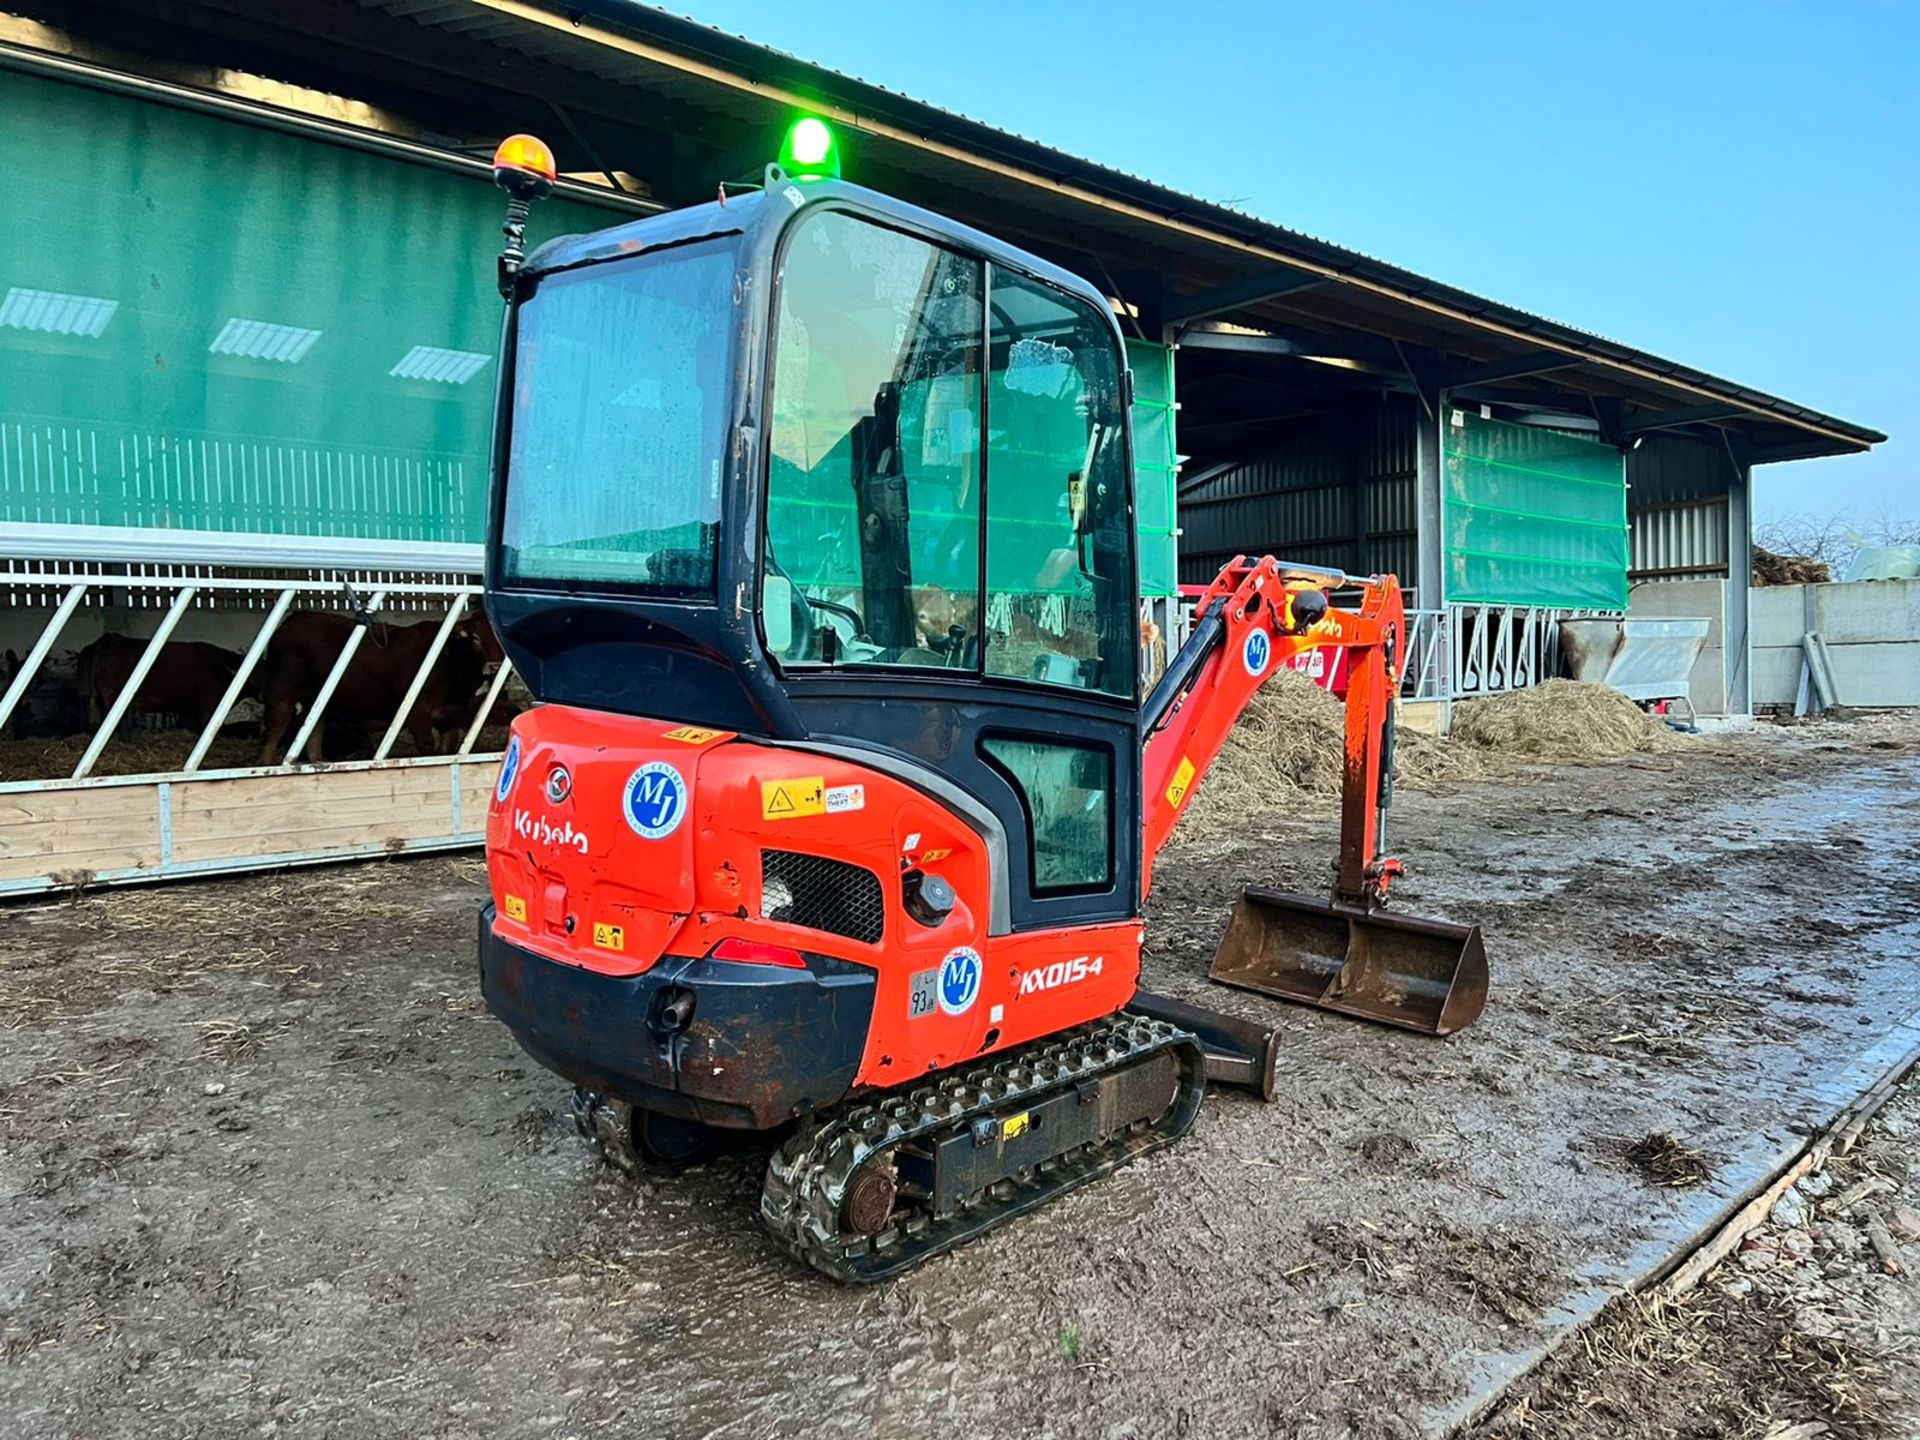 2015 KUBOTA KX015-4 1.5 TON MINI DIGGER, RUNS DRIVES DIGS, SHOWING A LOW AND GENUINE 1850 HOURS - Image 5 of 11